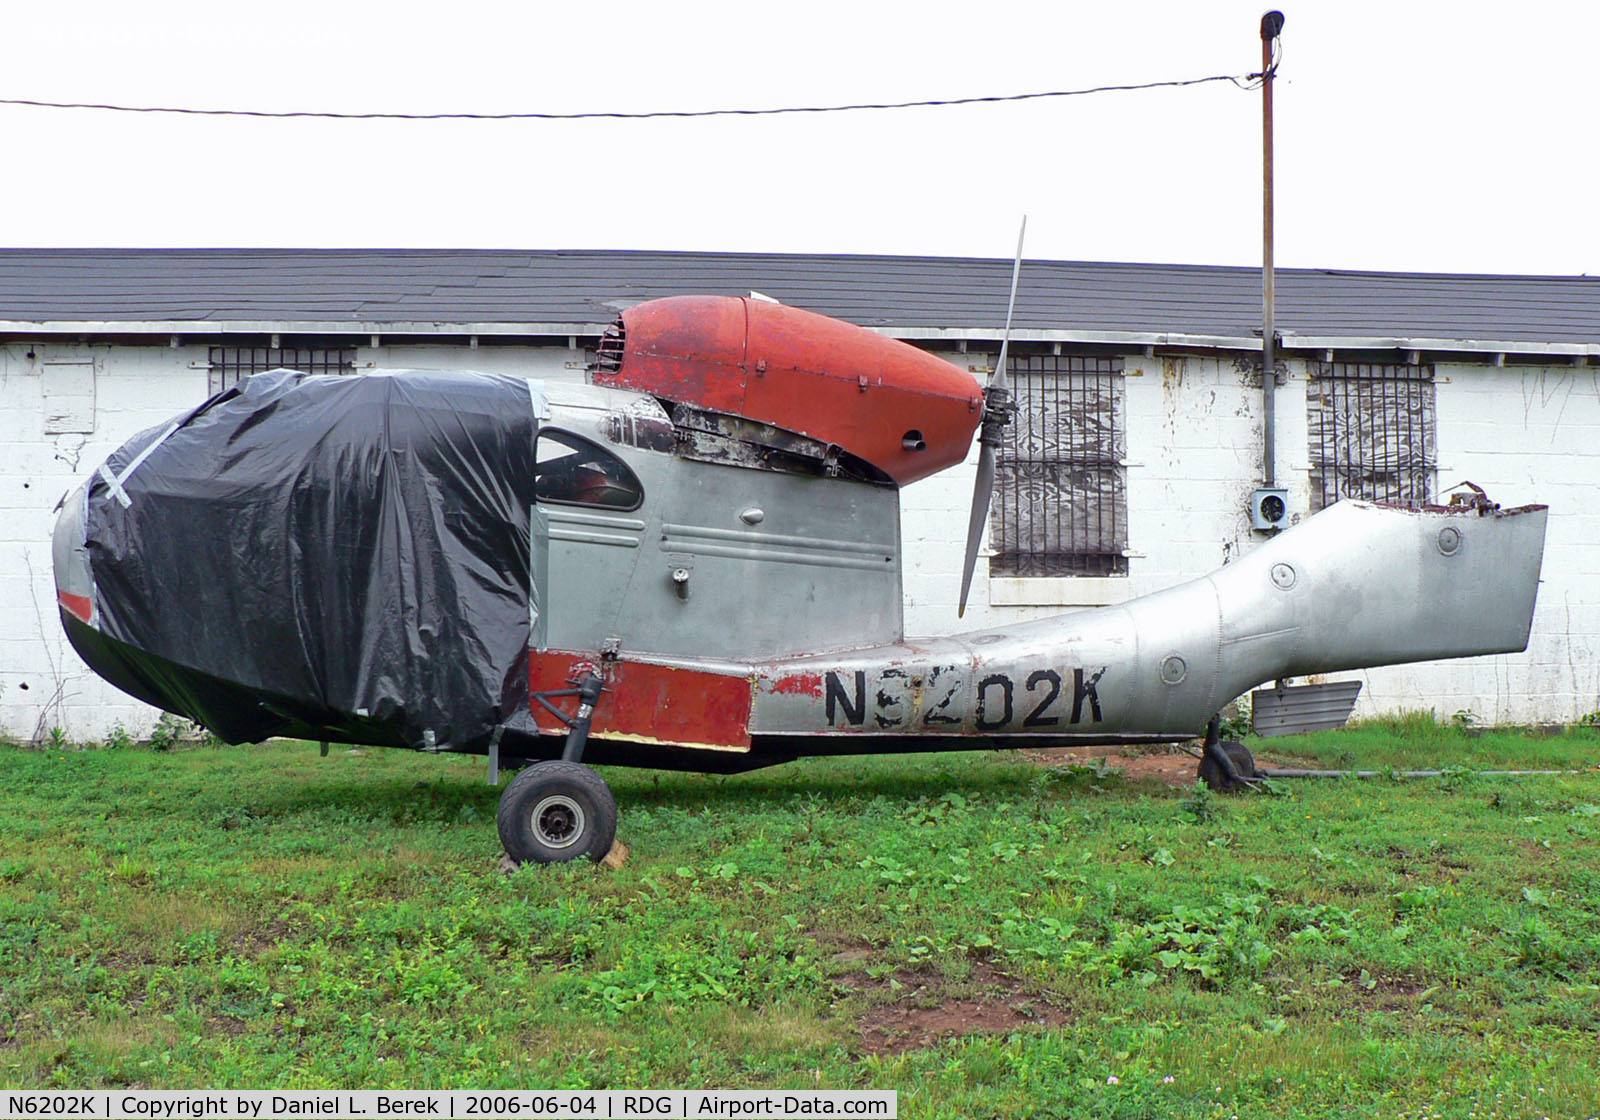 N6202K, 1947 Downer Republic RC-3 Seabee C/N 398, This 1947-vintage Republic RC-3 Seabee has hopes of restoration at the Mid Atlantic Air Museum, Reading, PA.